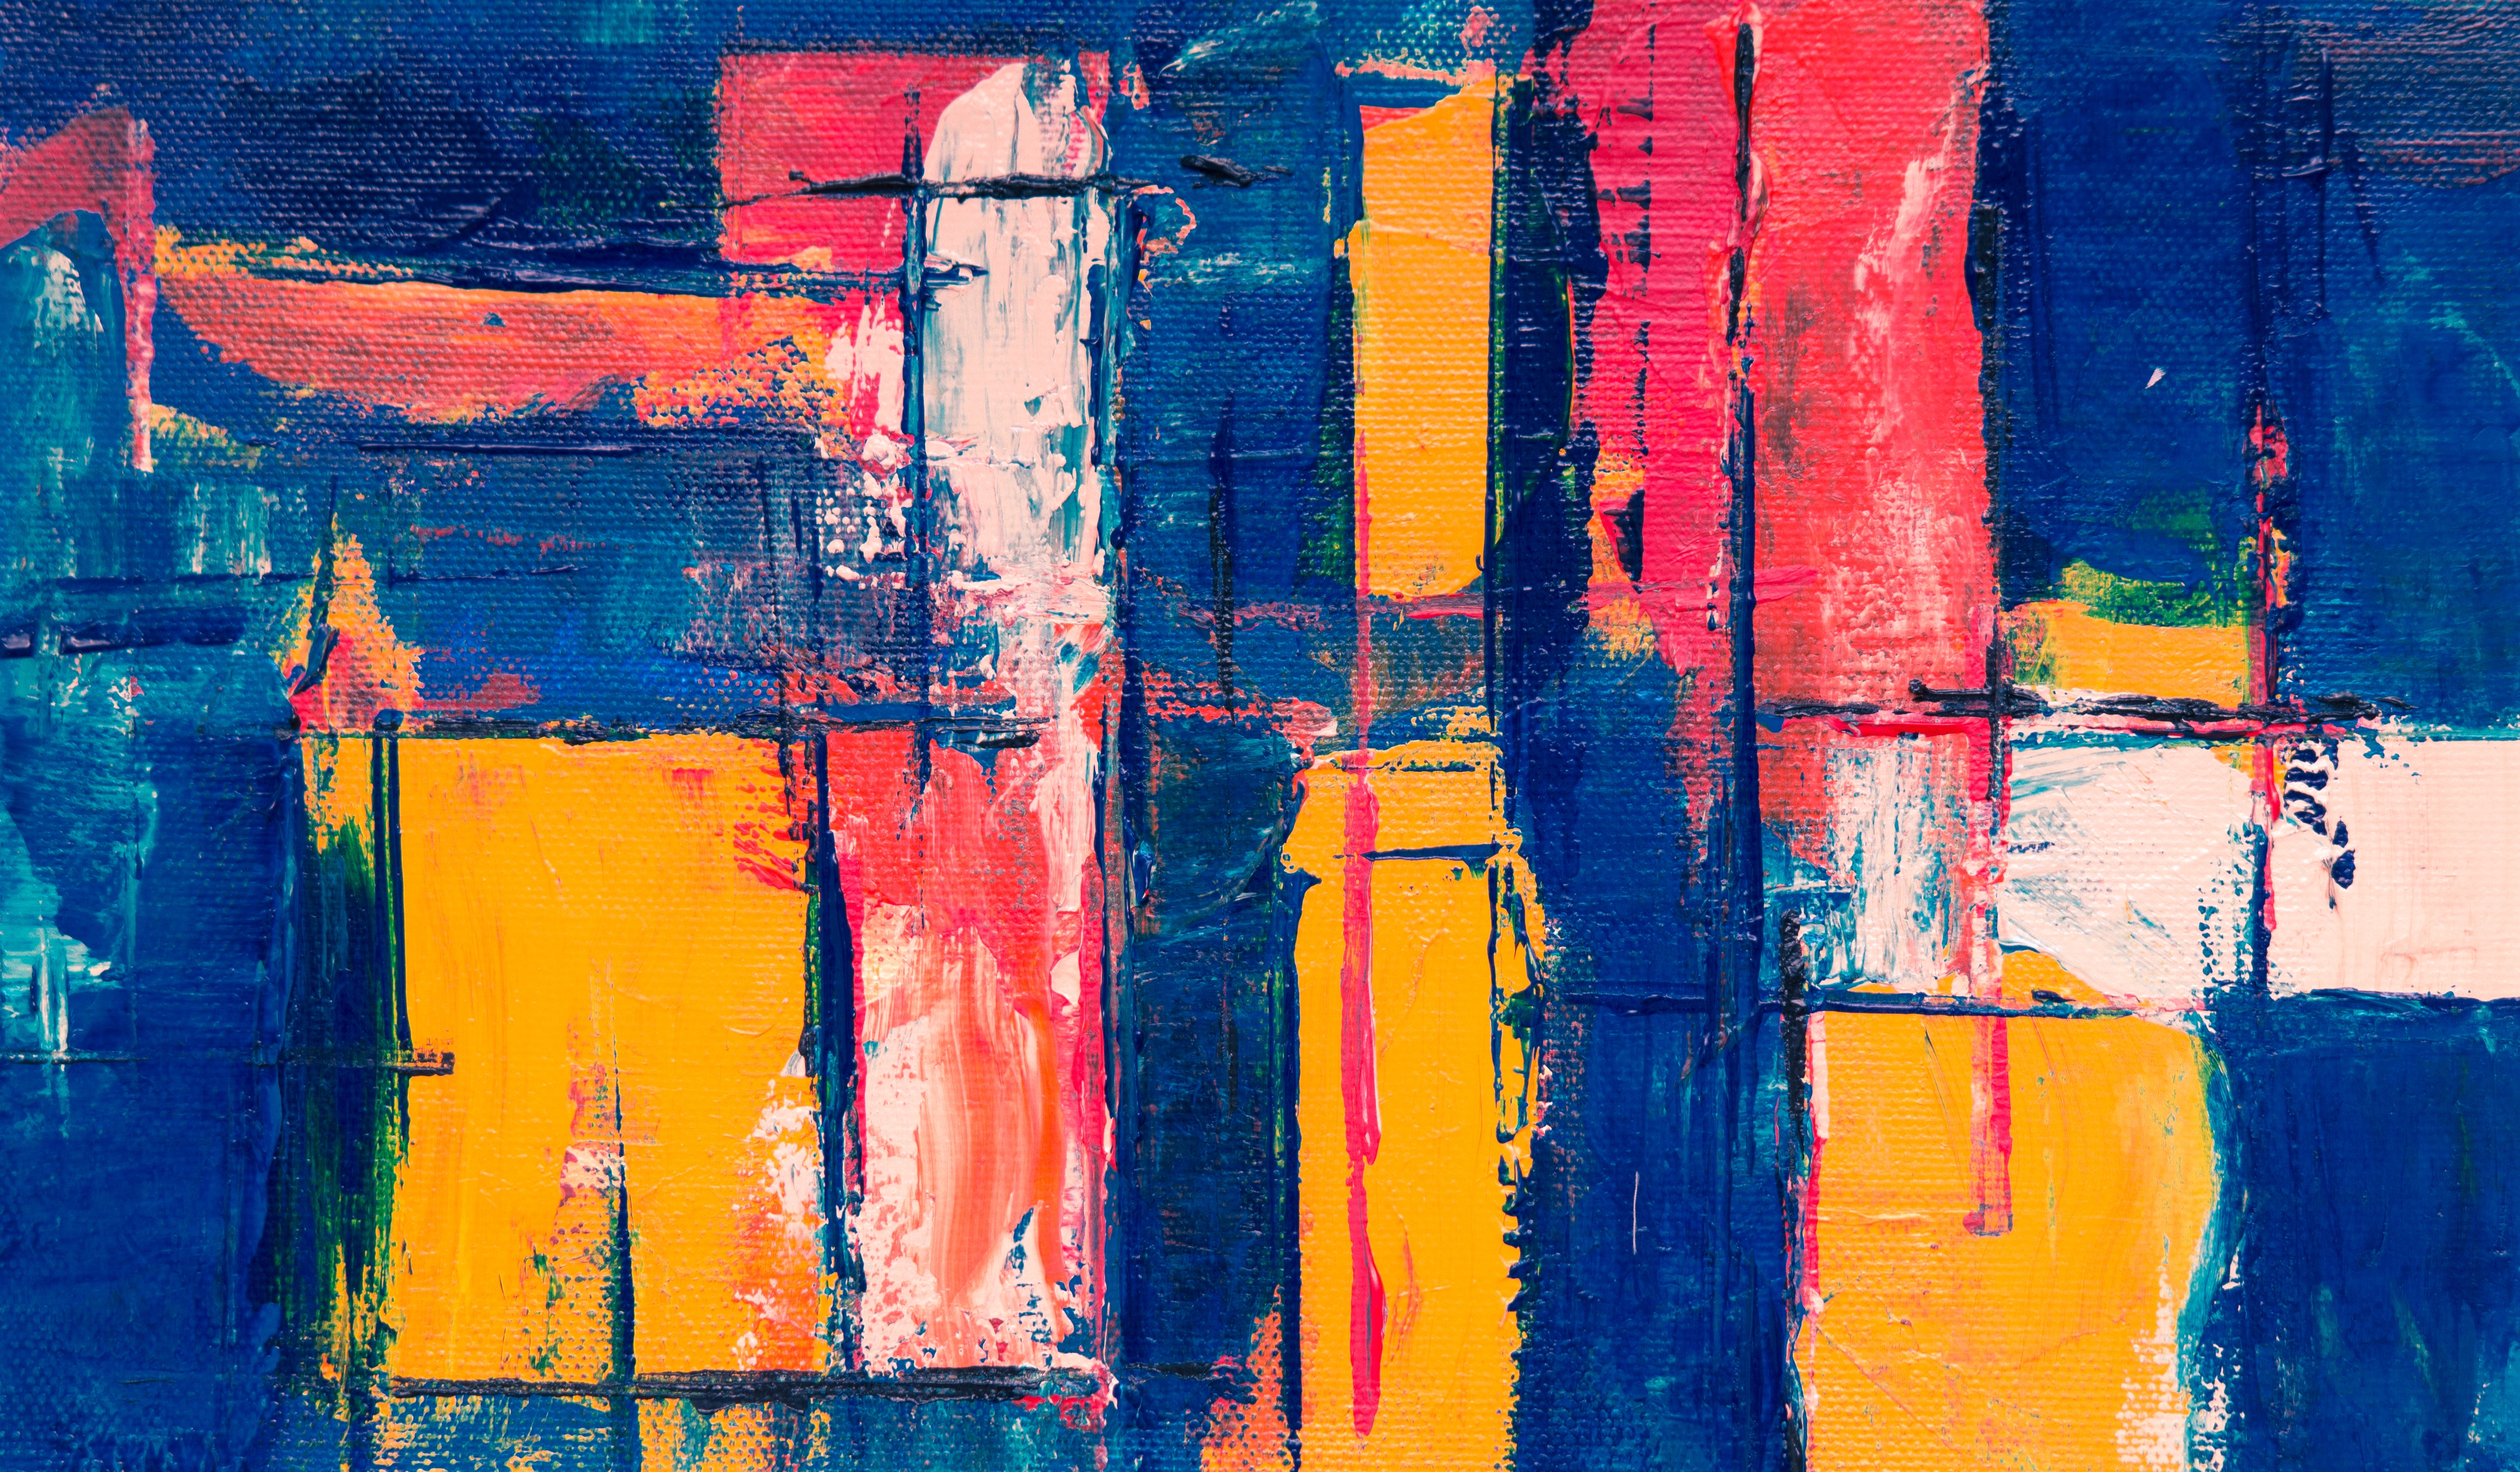 textures, motley, texture, canvas, multicolored, abstract, paint, smears, strokes